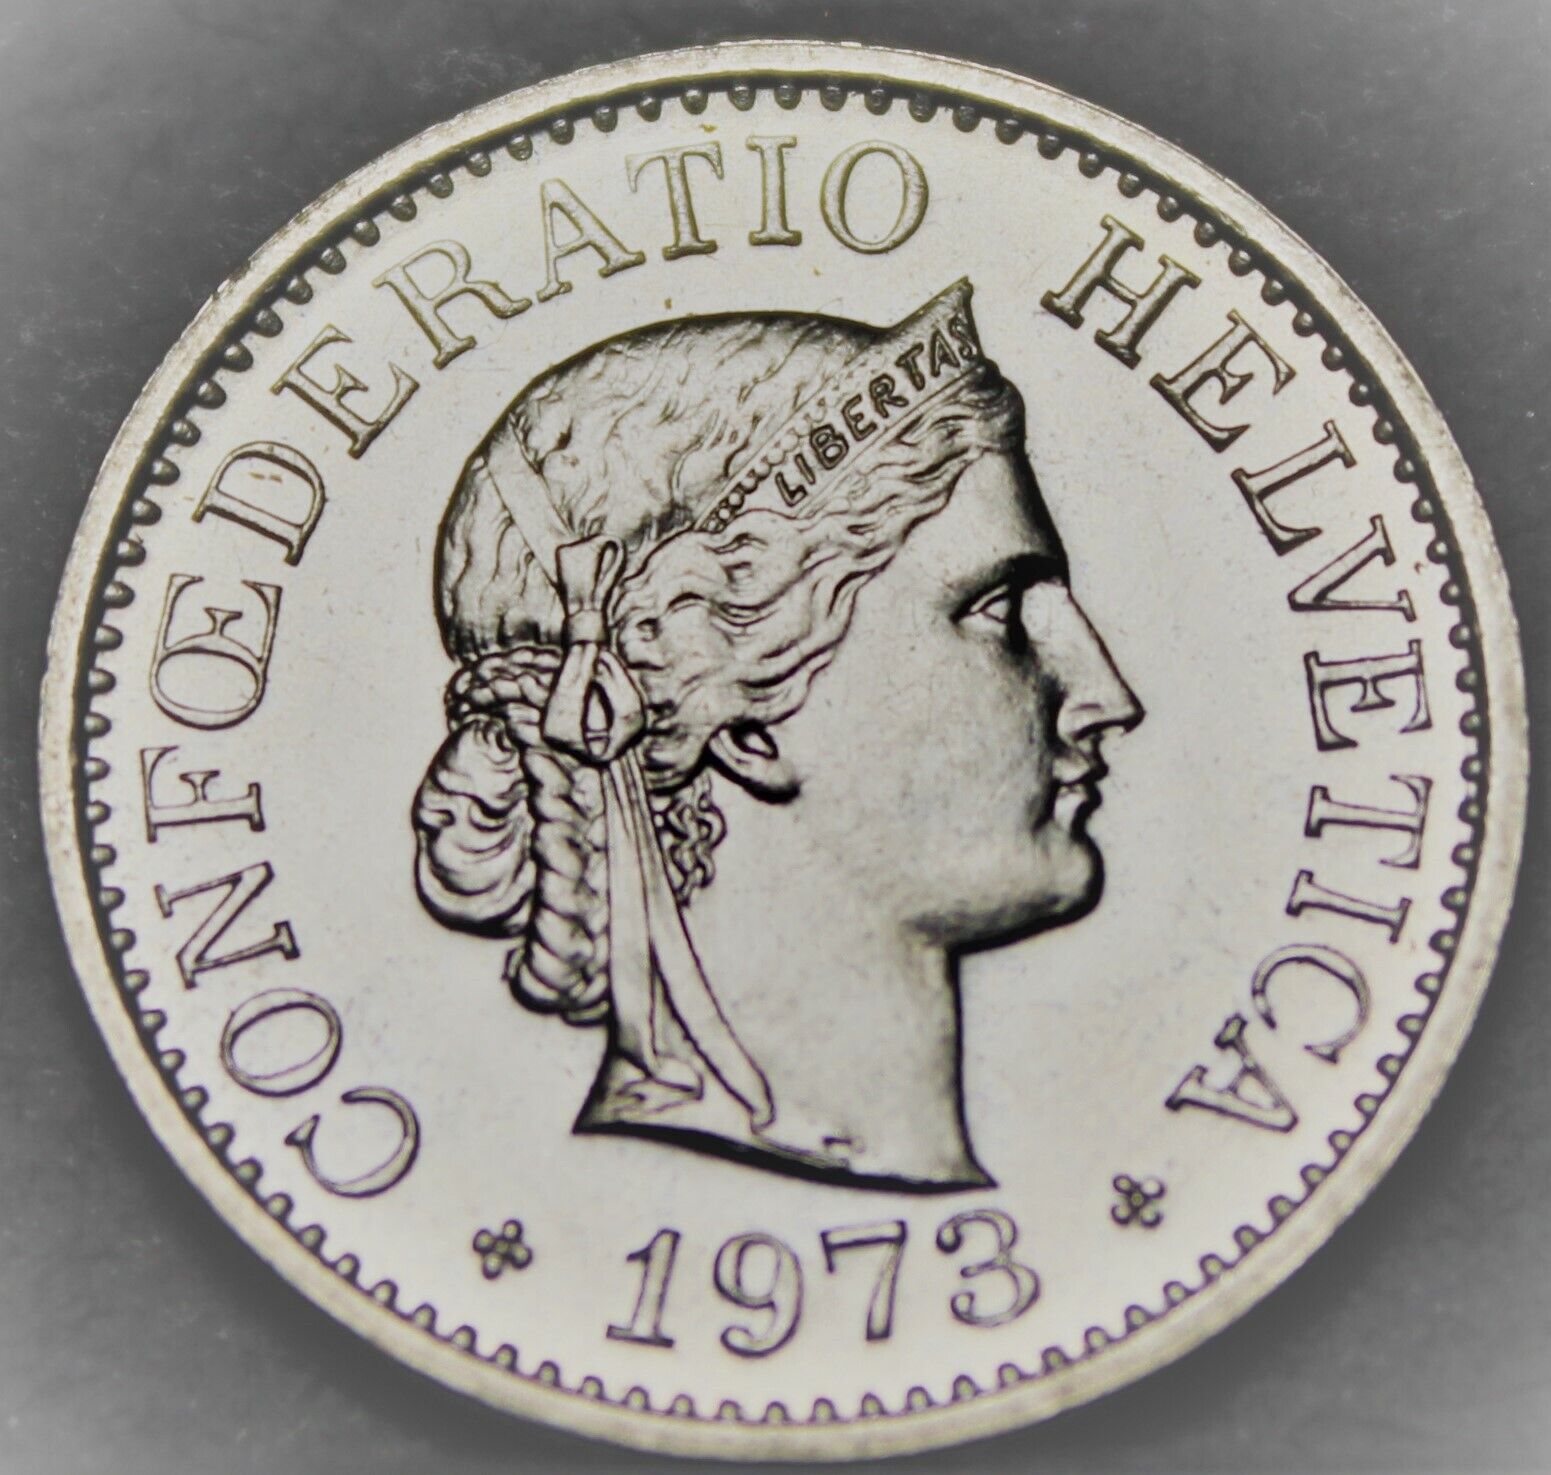 What is a Confederatio Helvetica 10 coin worth? - Answers